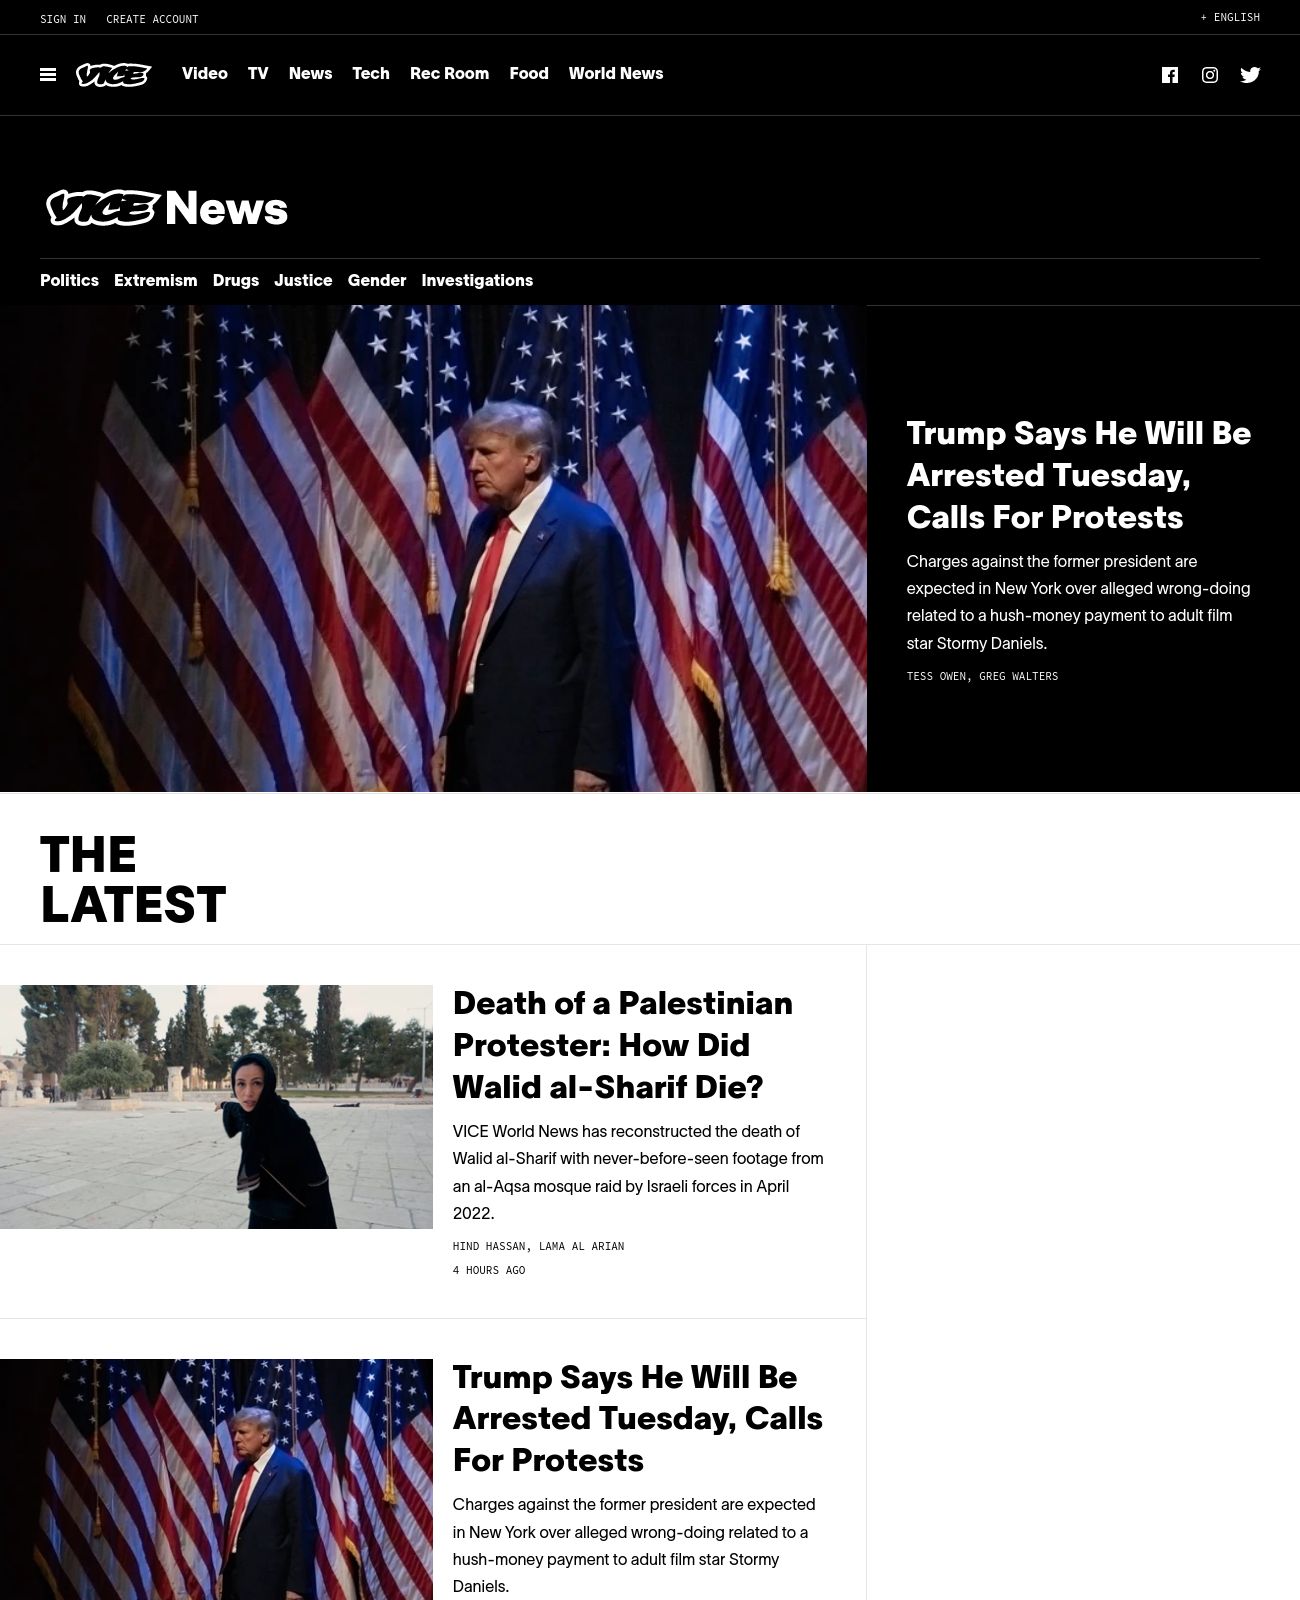 Vice News at 2023-03-18 20:43:40-04:00 local time